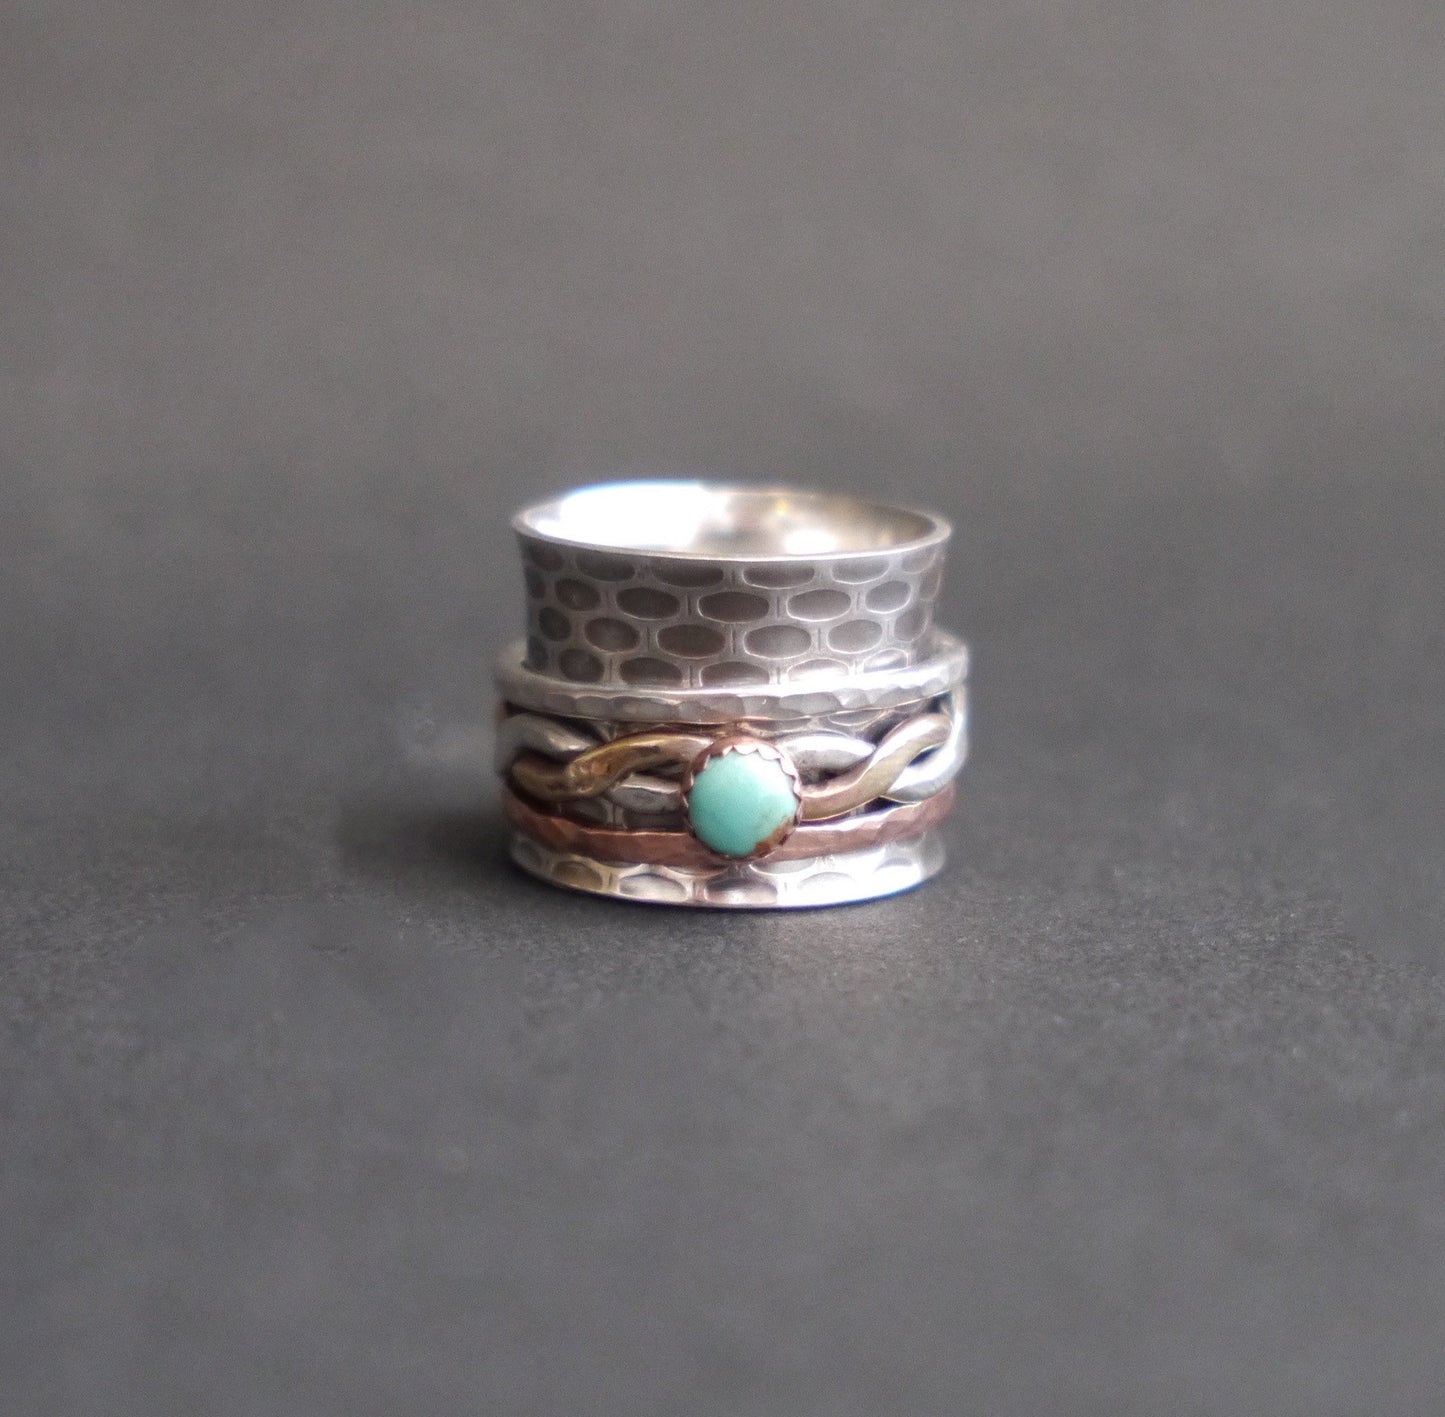 Turquoise Spinner Ring - Meditation Ring - Worry Ring - Size 7